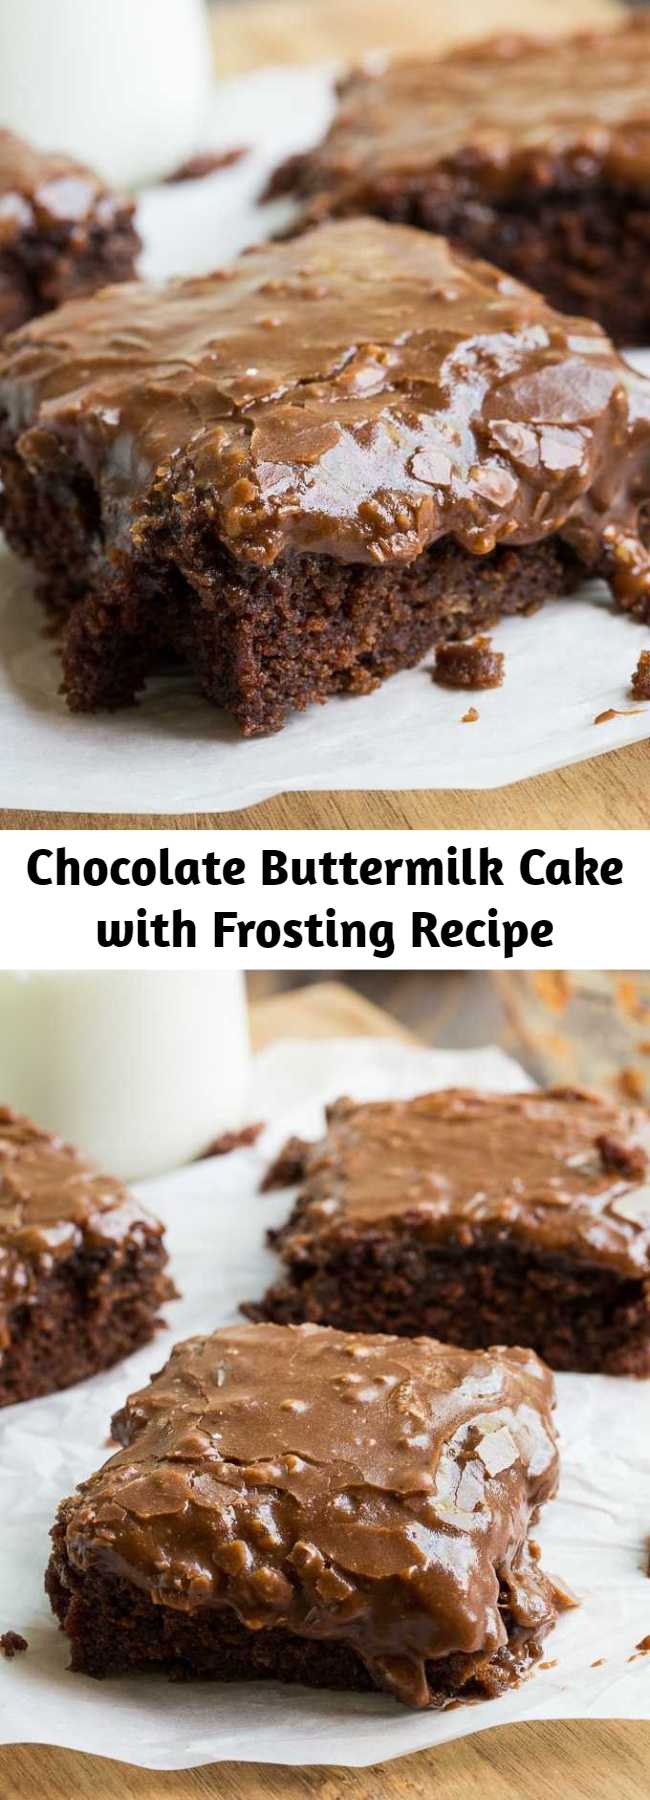 Chocolate Buttermilk Cake with Frosting Recipe - A moist and chocolaty buttermilk cake topped with a sweet and fudgy chocolate buttermilk frosting with pecans. A simple, old-fashioned dessert that never goes out of style because it's so darn good.